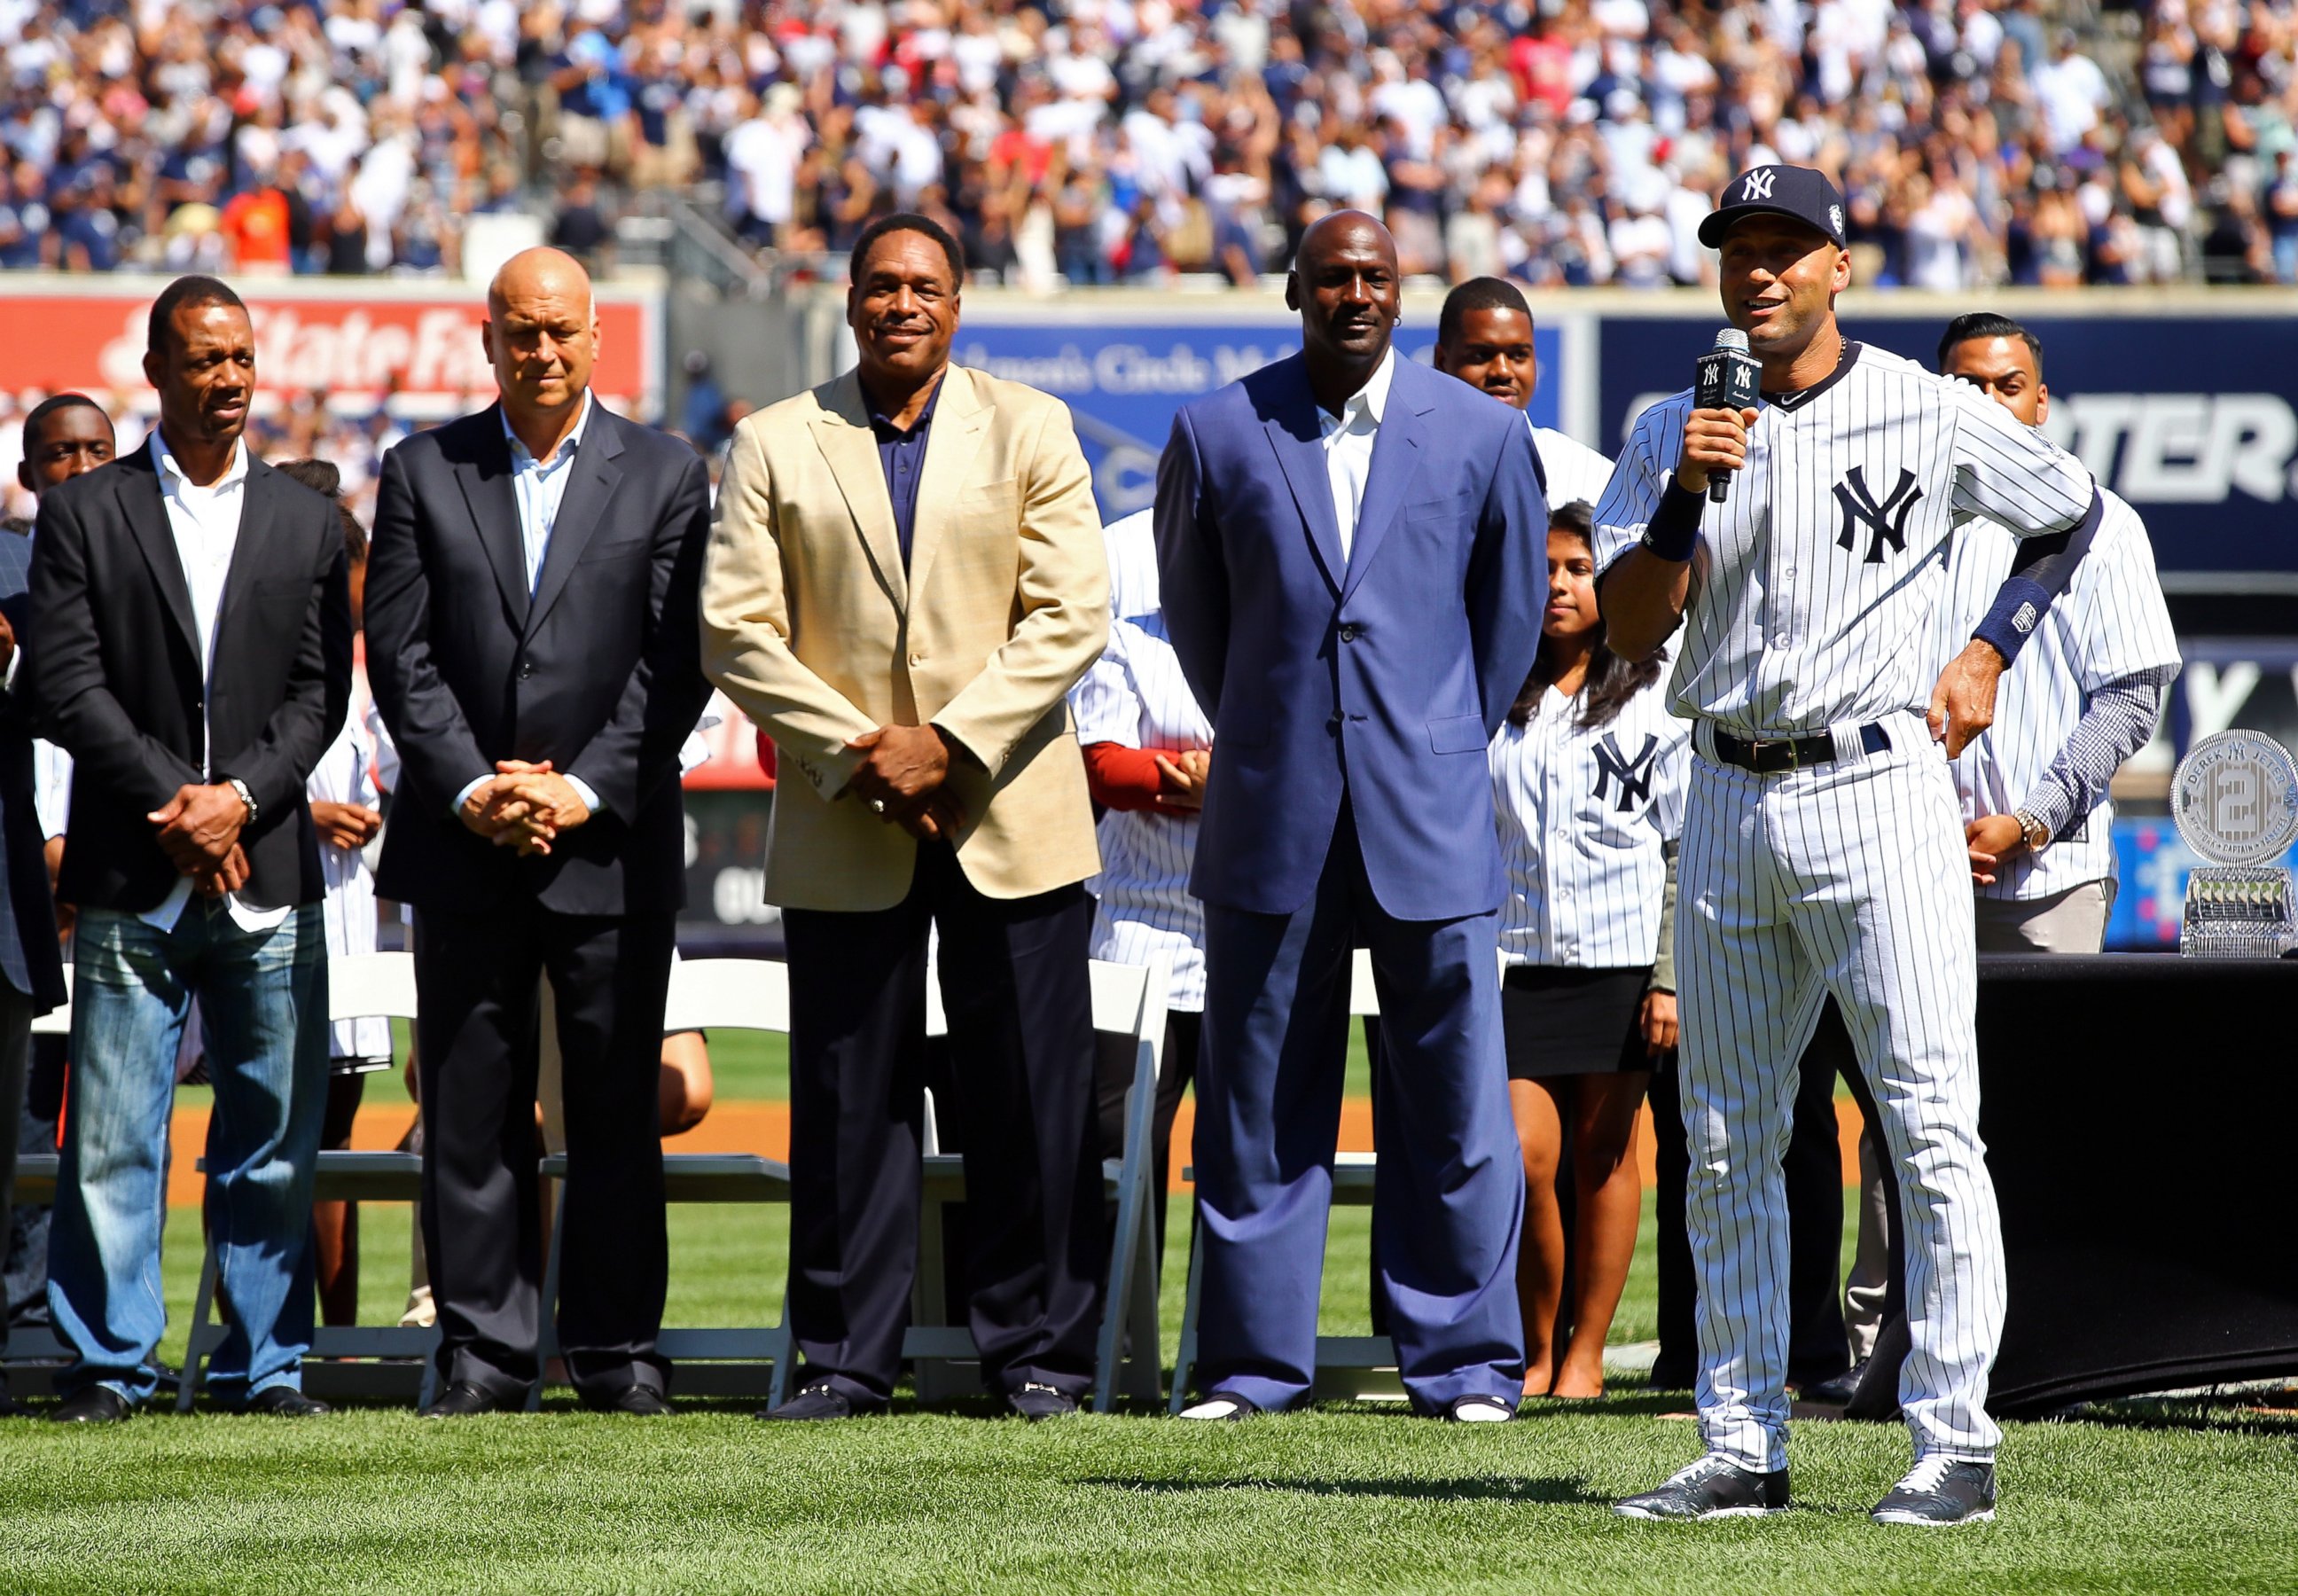 PHOTO: From right, Derek Jeter of the New York Yankees speaks to the crowd